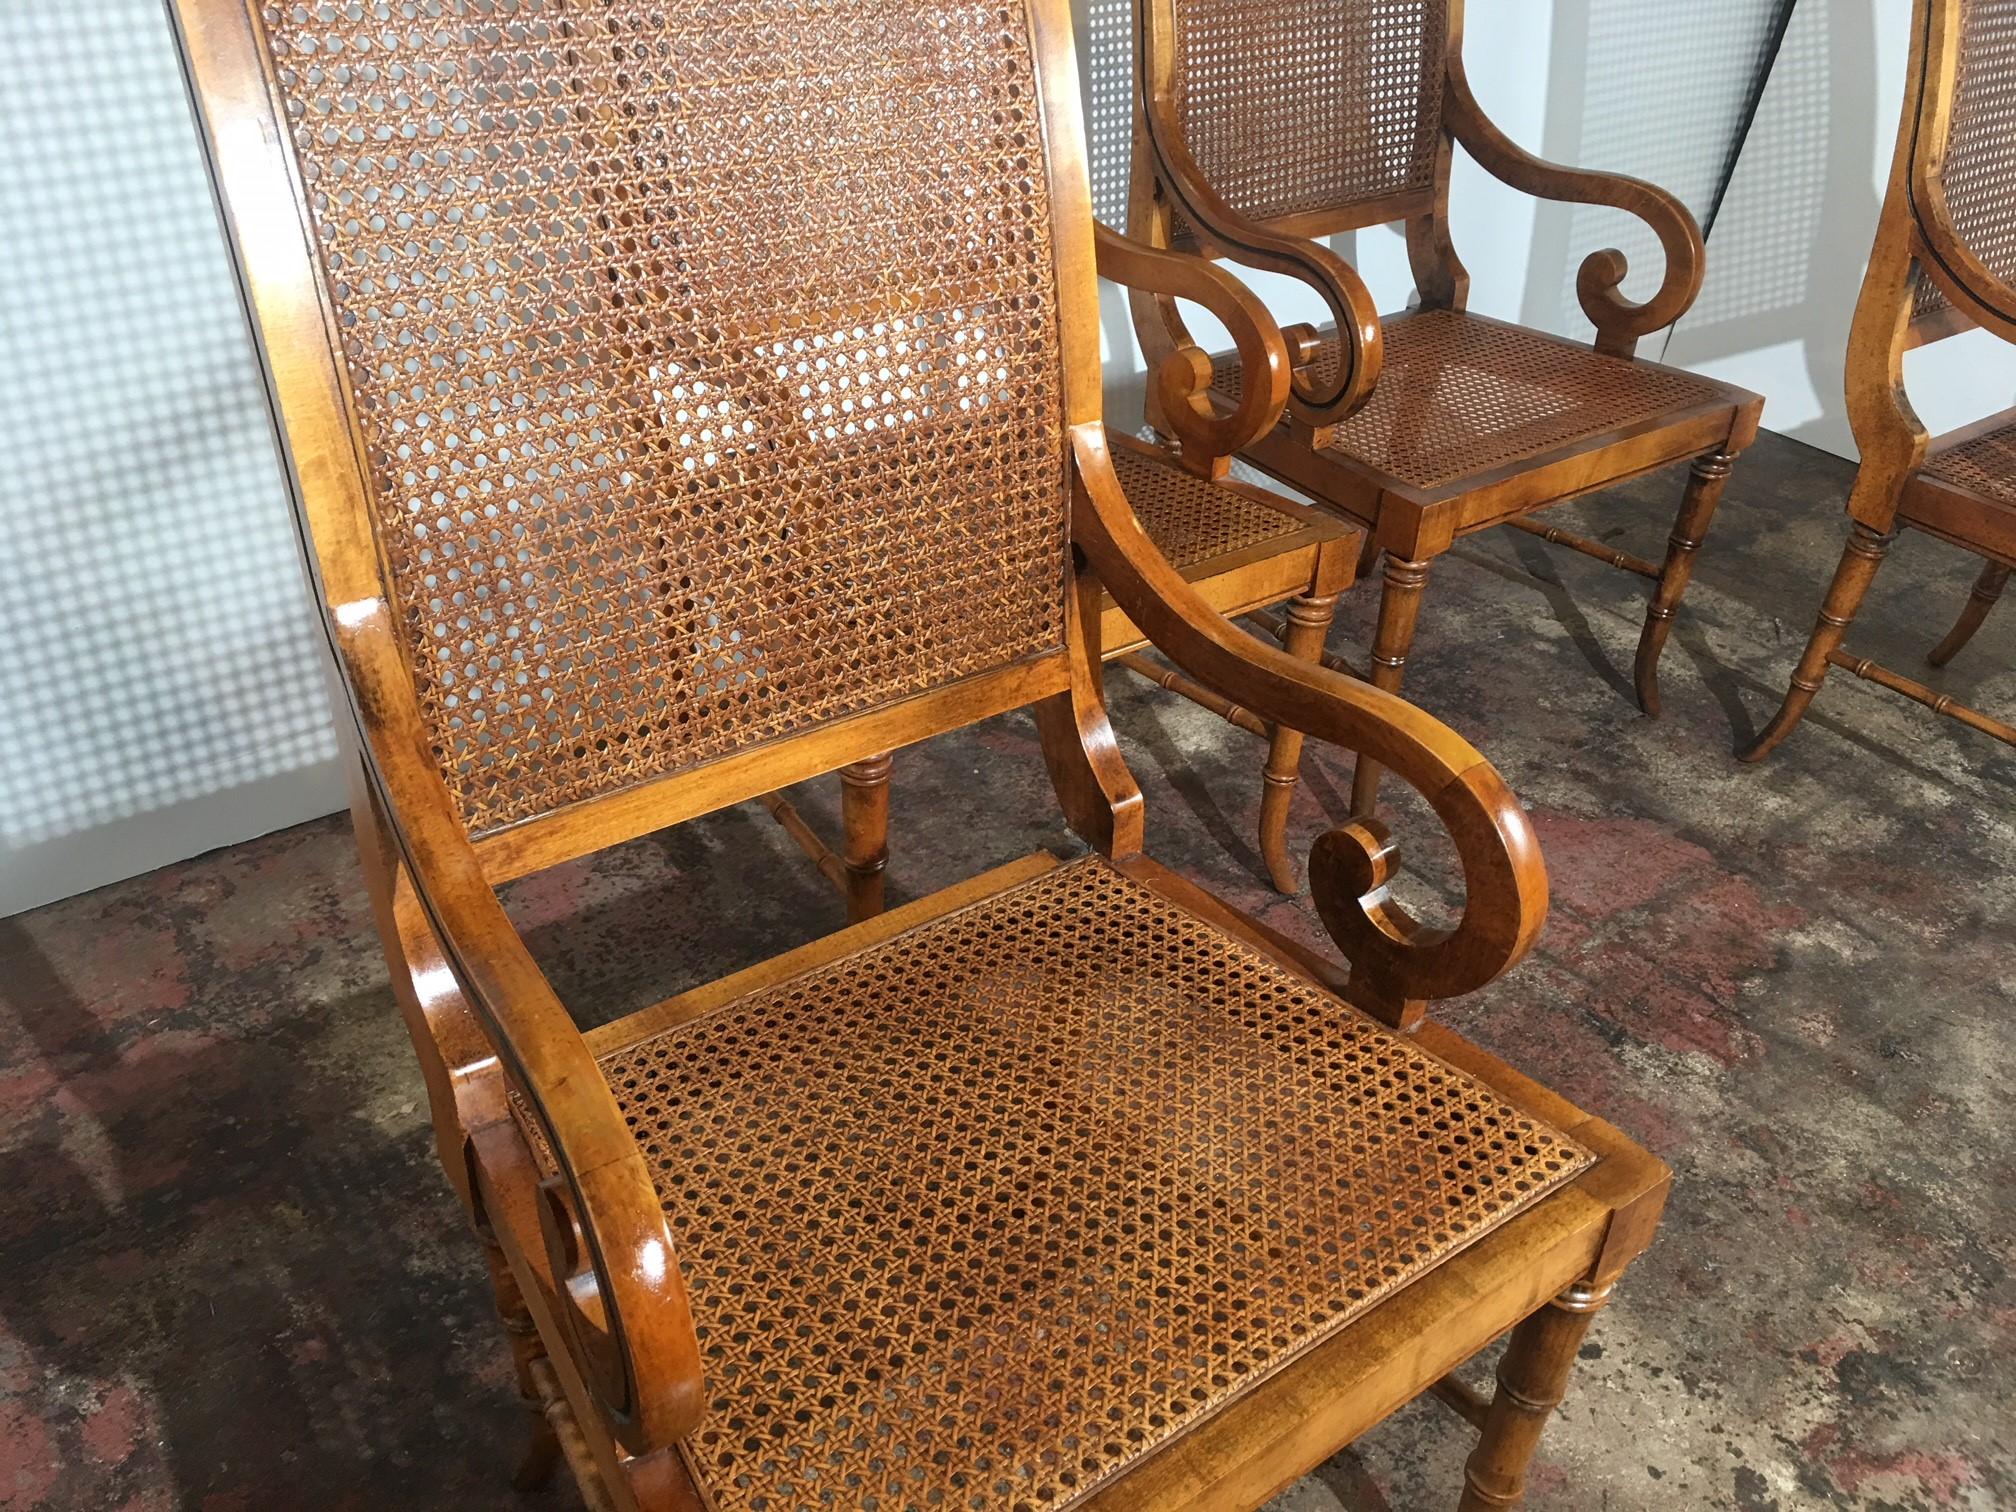 Set of four cane seat cane back dining room chairs. The arms are curved, and the legs are faux bamboo. Measure arm: 23.50